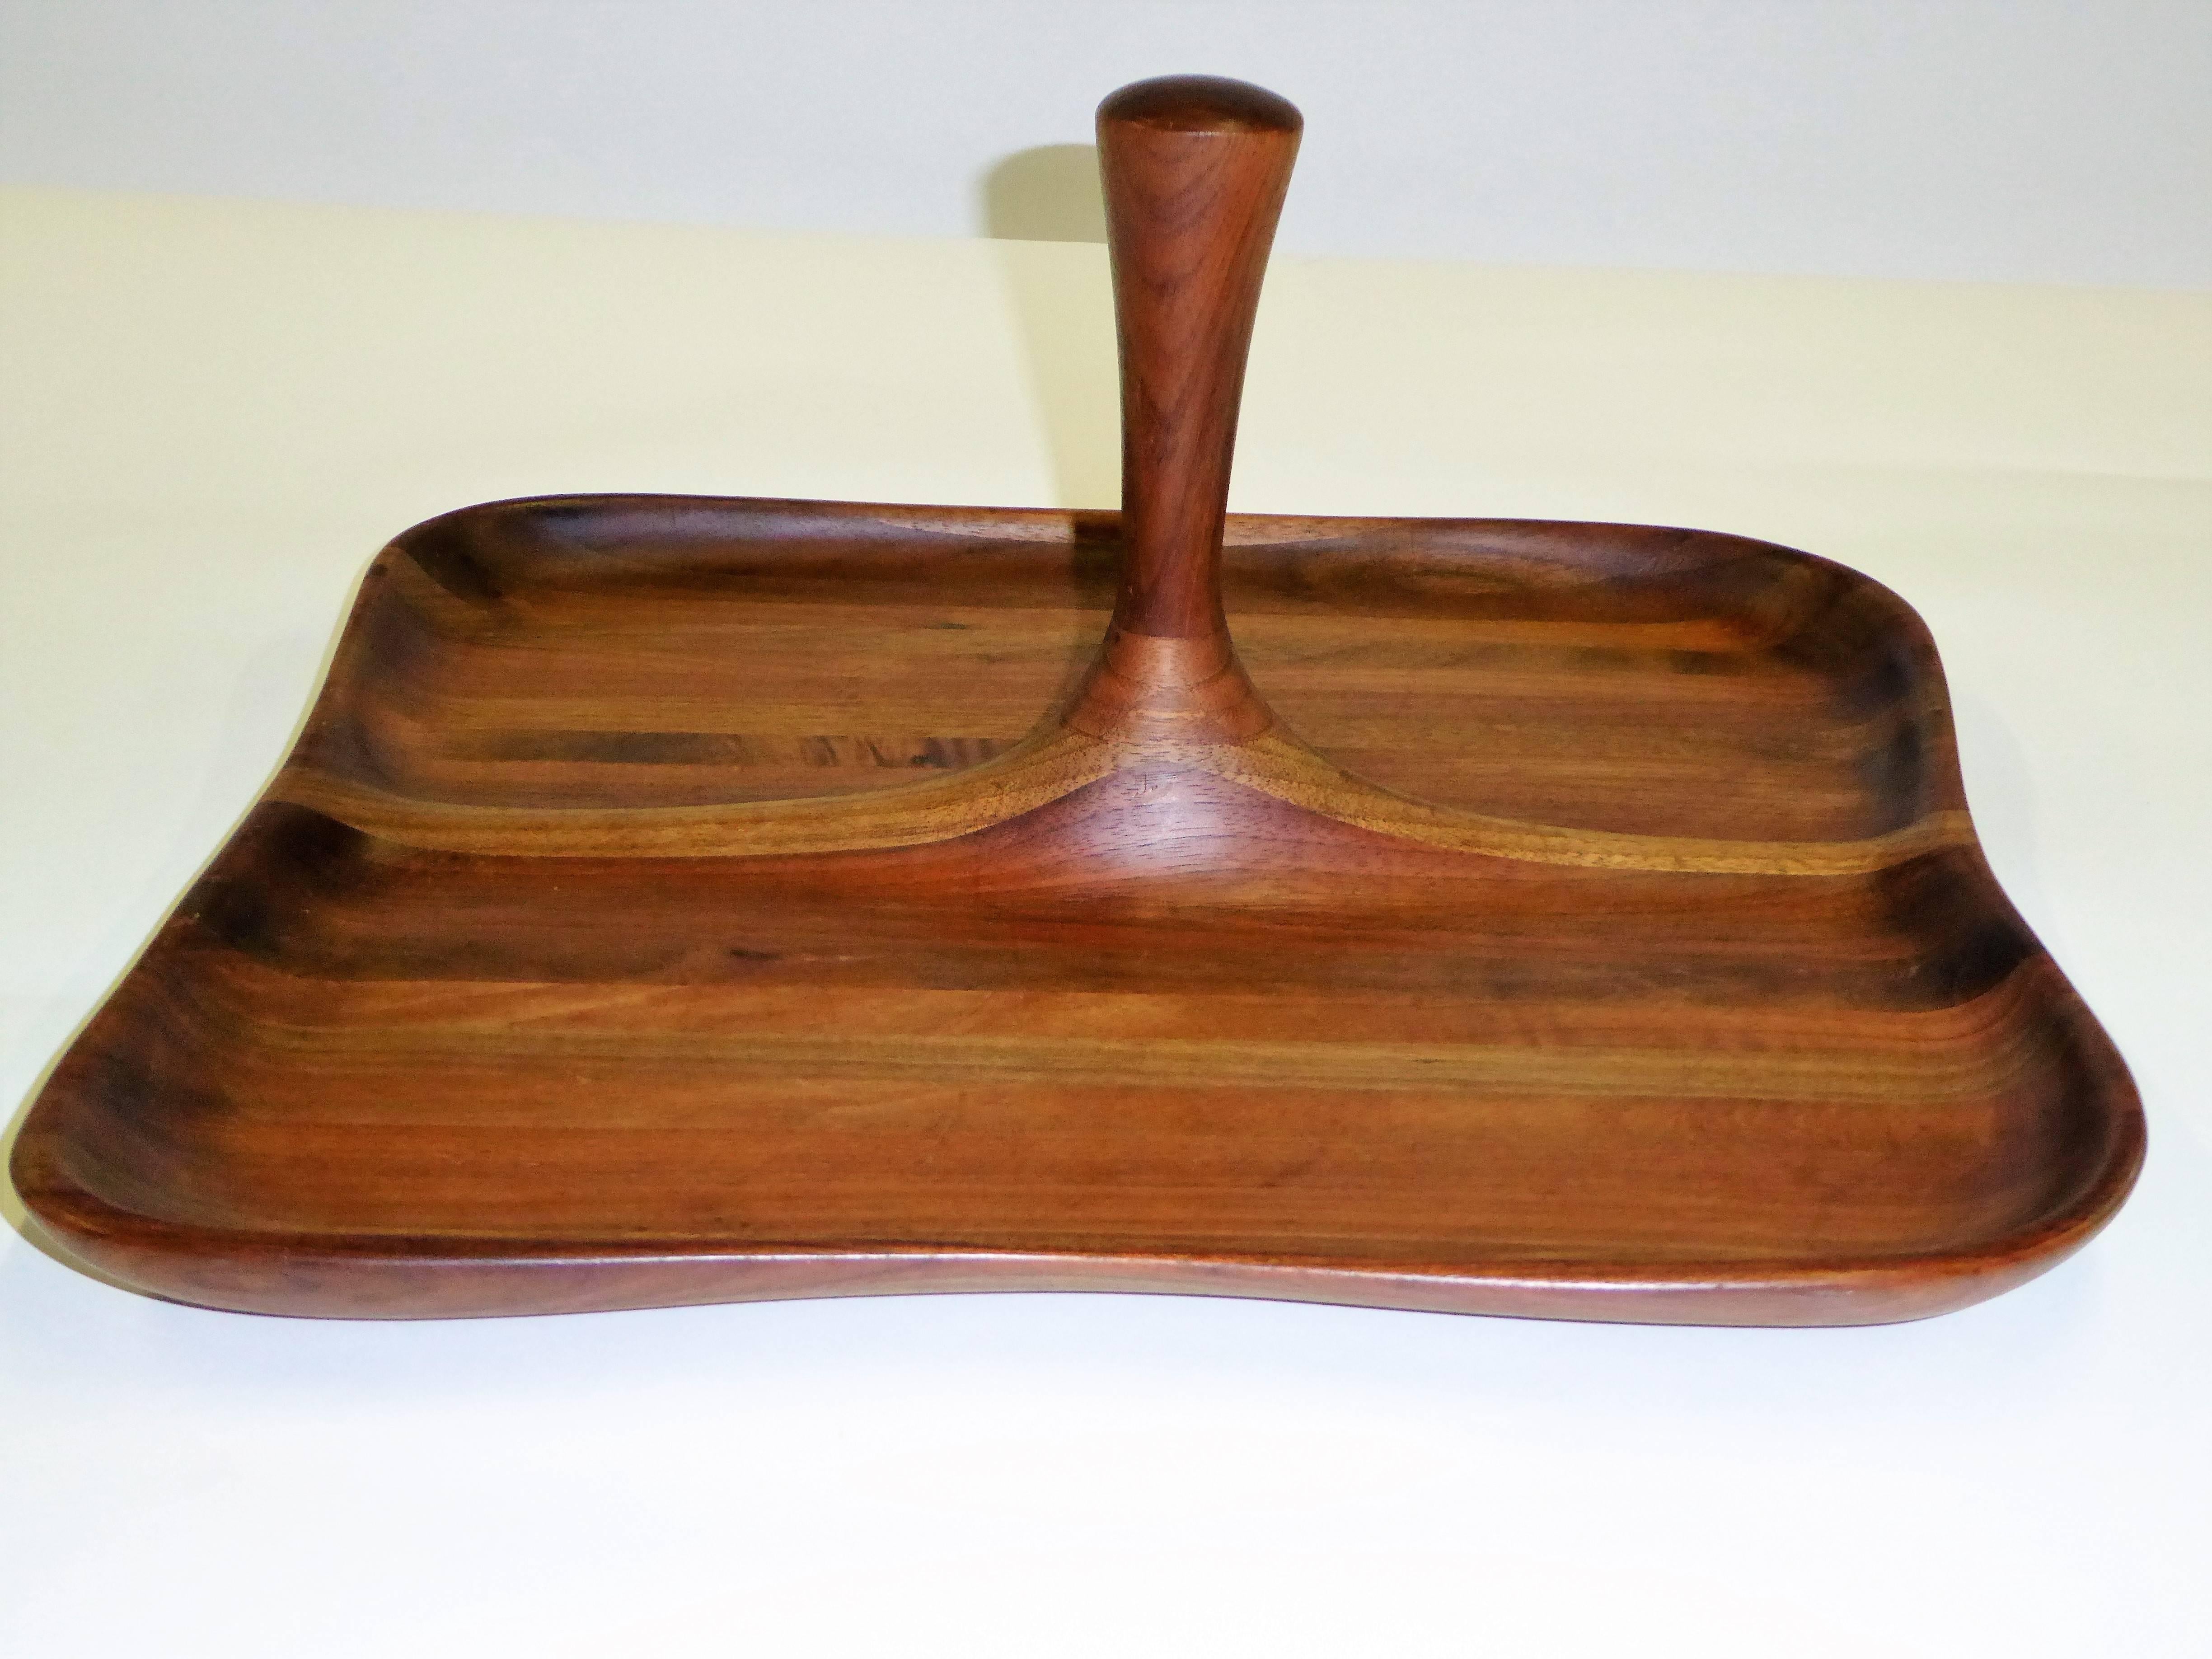  An extraordinary 20th century beauty, Daniel Loomis Valenza designed sinuous organic solid laminated walnut serving tray. Wonderful carved and sculpted shape with center handle, beautifully crafted with staved figured walnut. Perfect for cheese,